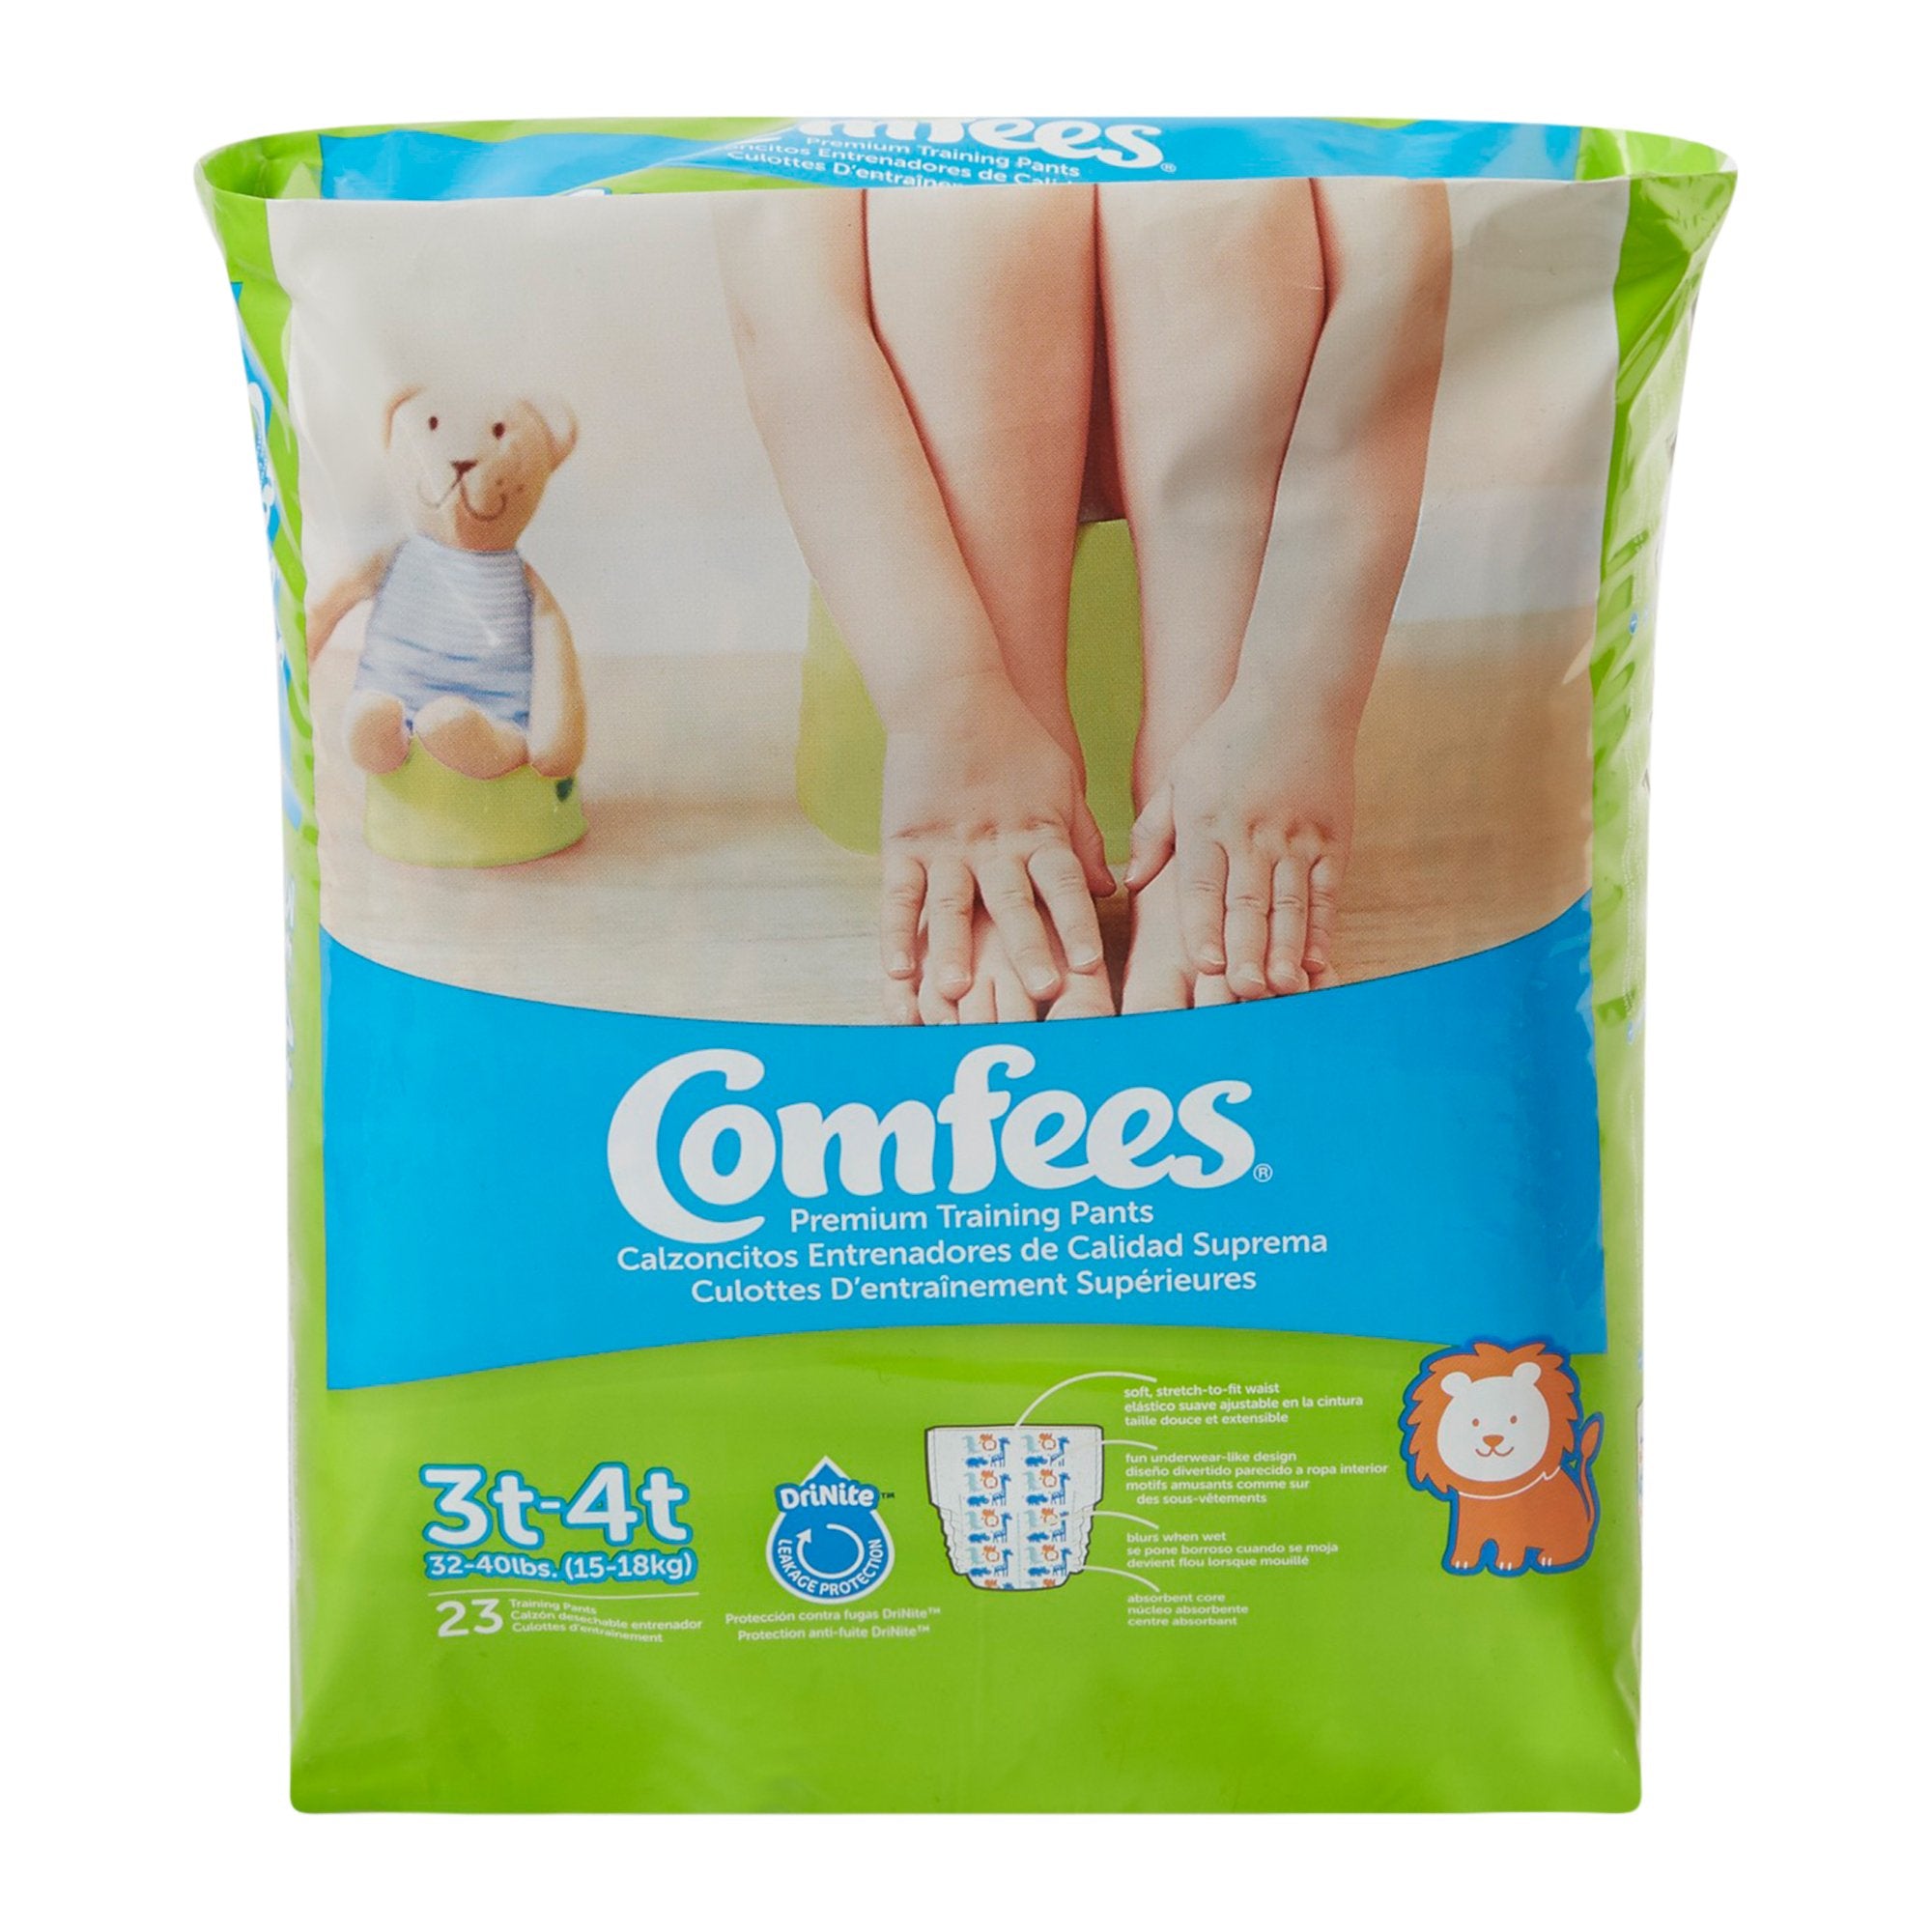 Comfees Training Pants, 12-Hour Protection, Male Toddler, 3T-4T, 32 to 40 Lbs